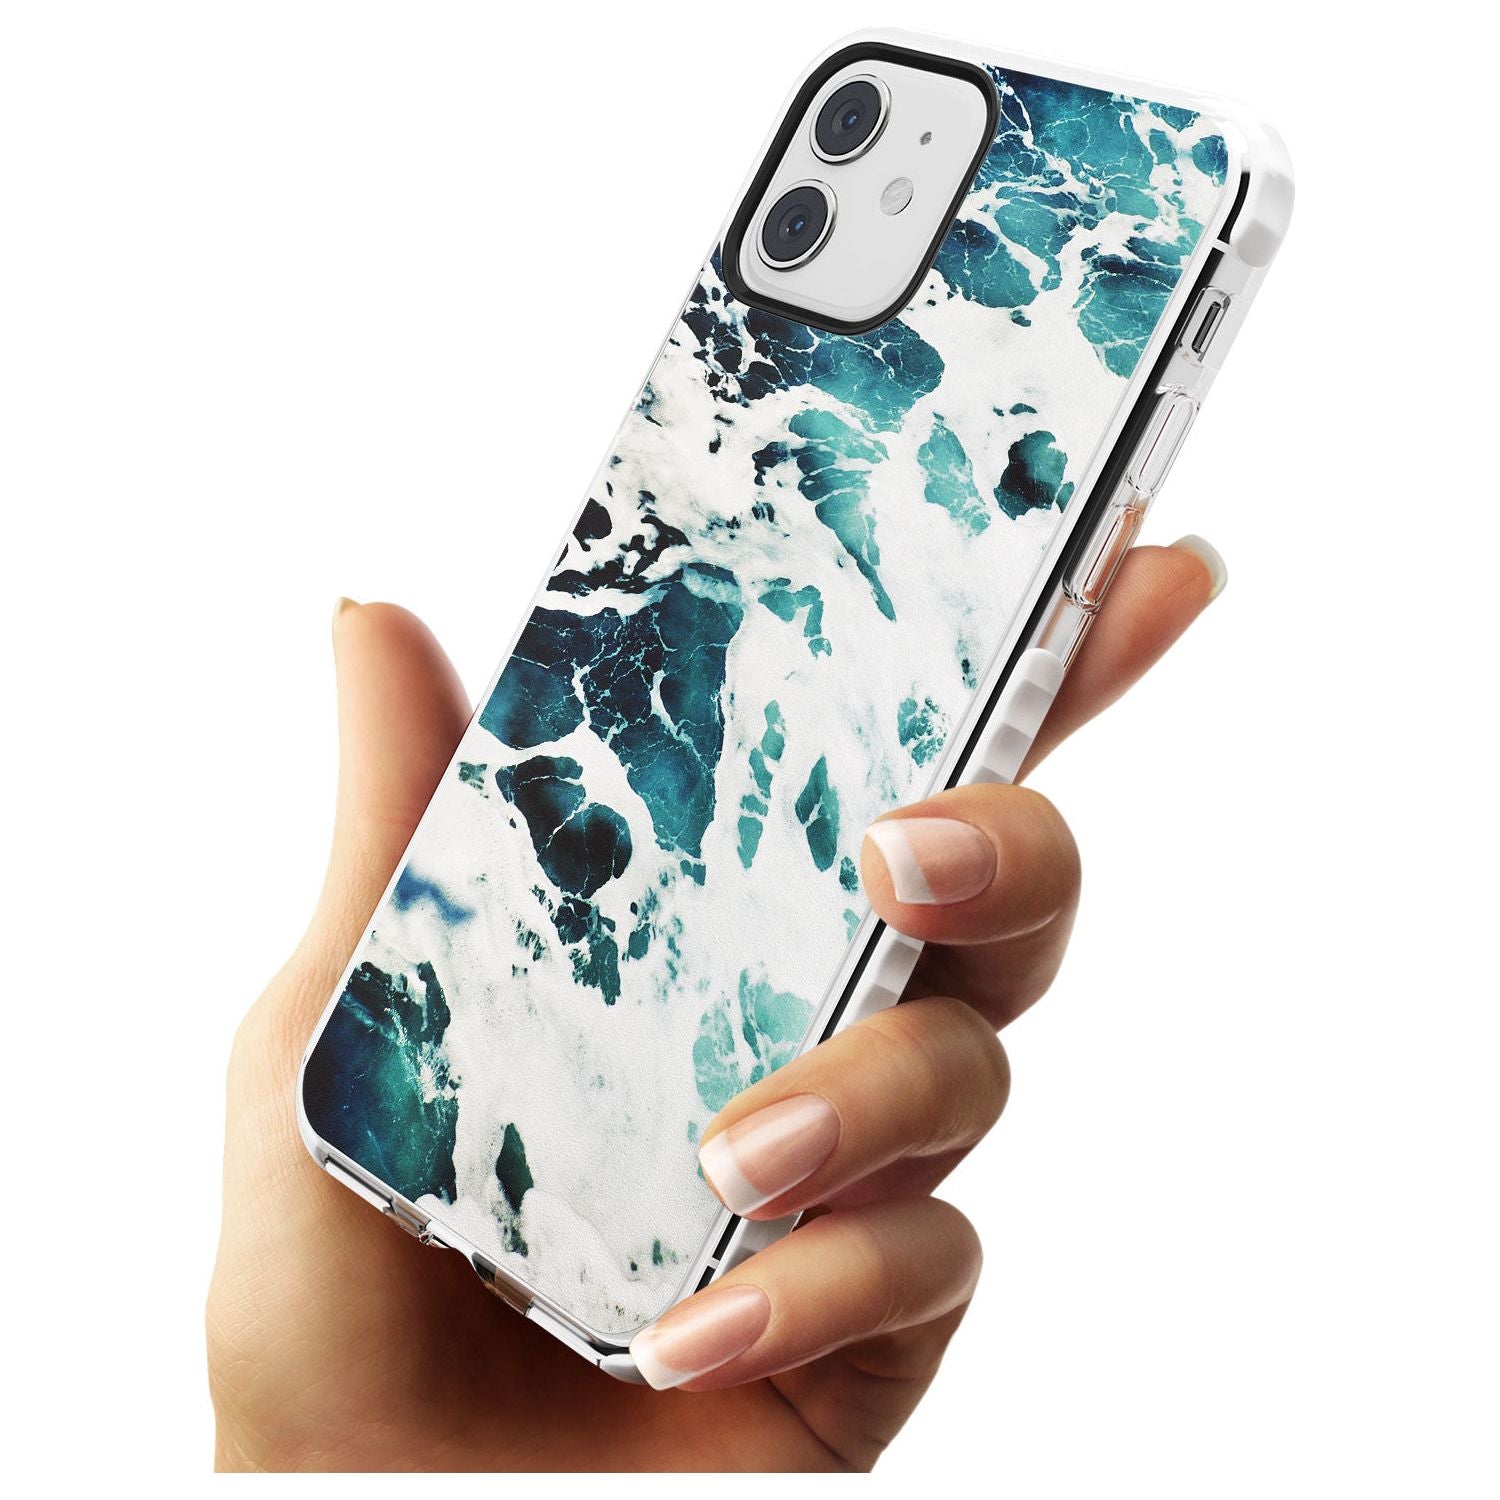 Ocean Waves Photograph Impact Phone Case for iPhone 11